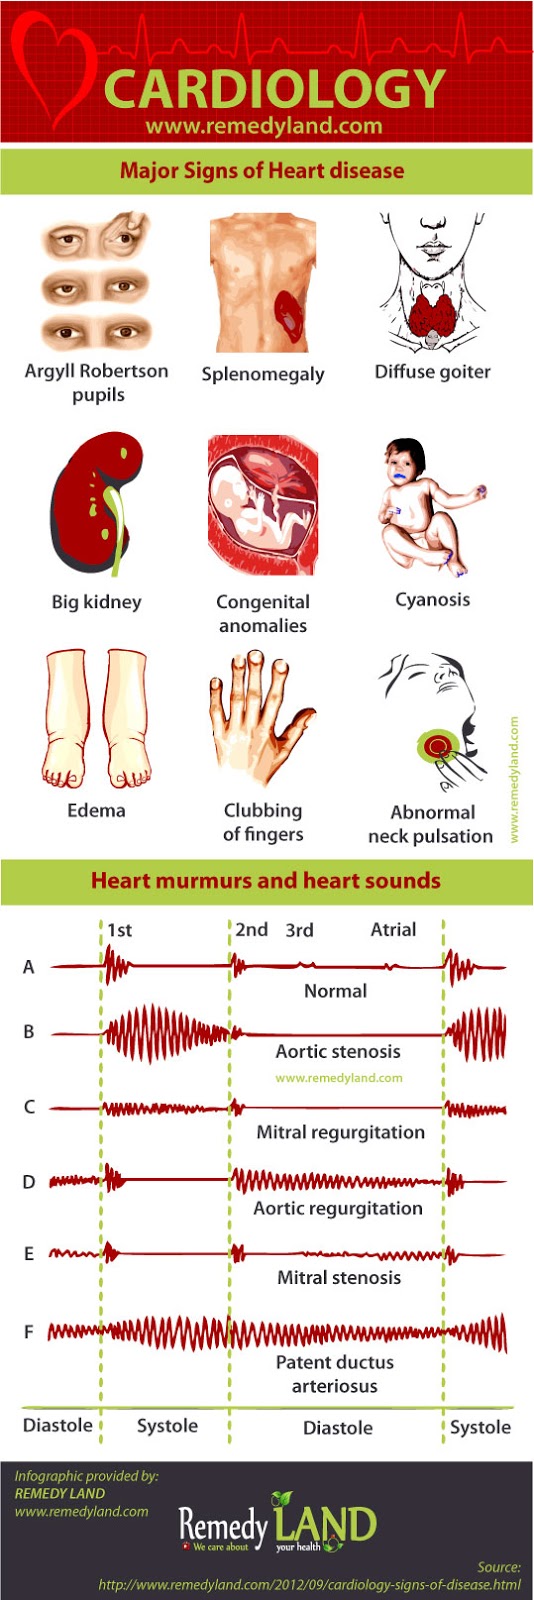 signs of heart disease: Argyll Robertson pupils, splenomegaly, diffuse goiter, a big kidney, congenital anomalies, abnormal venous pulsation in the neck, cyanosis, edema, clubbing of fingers, heart murmurs and heart sounds